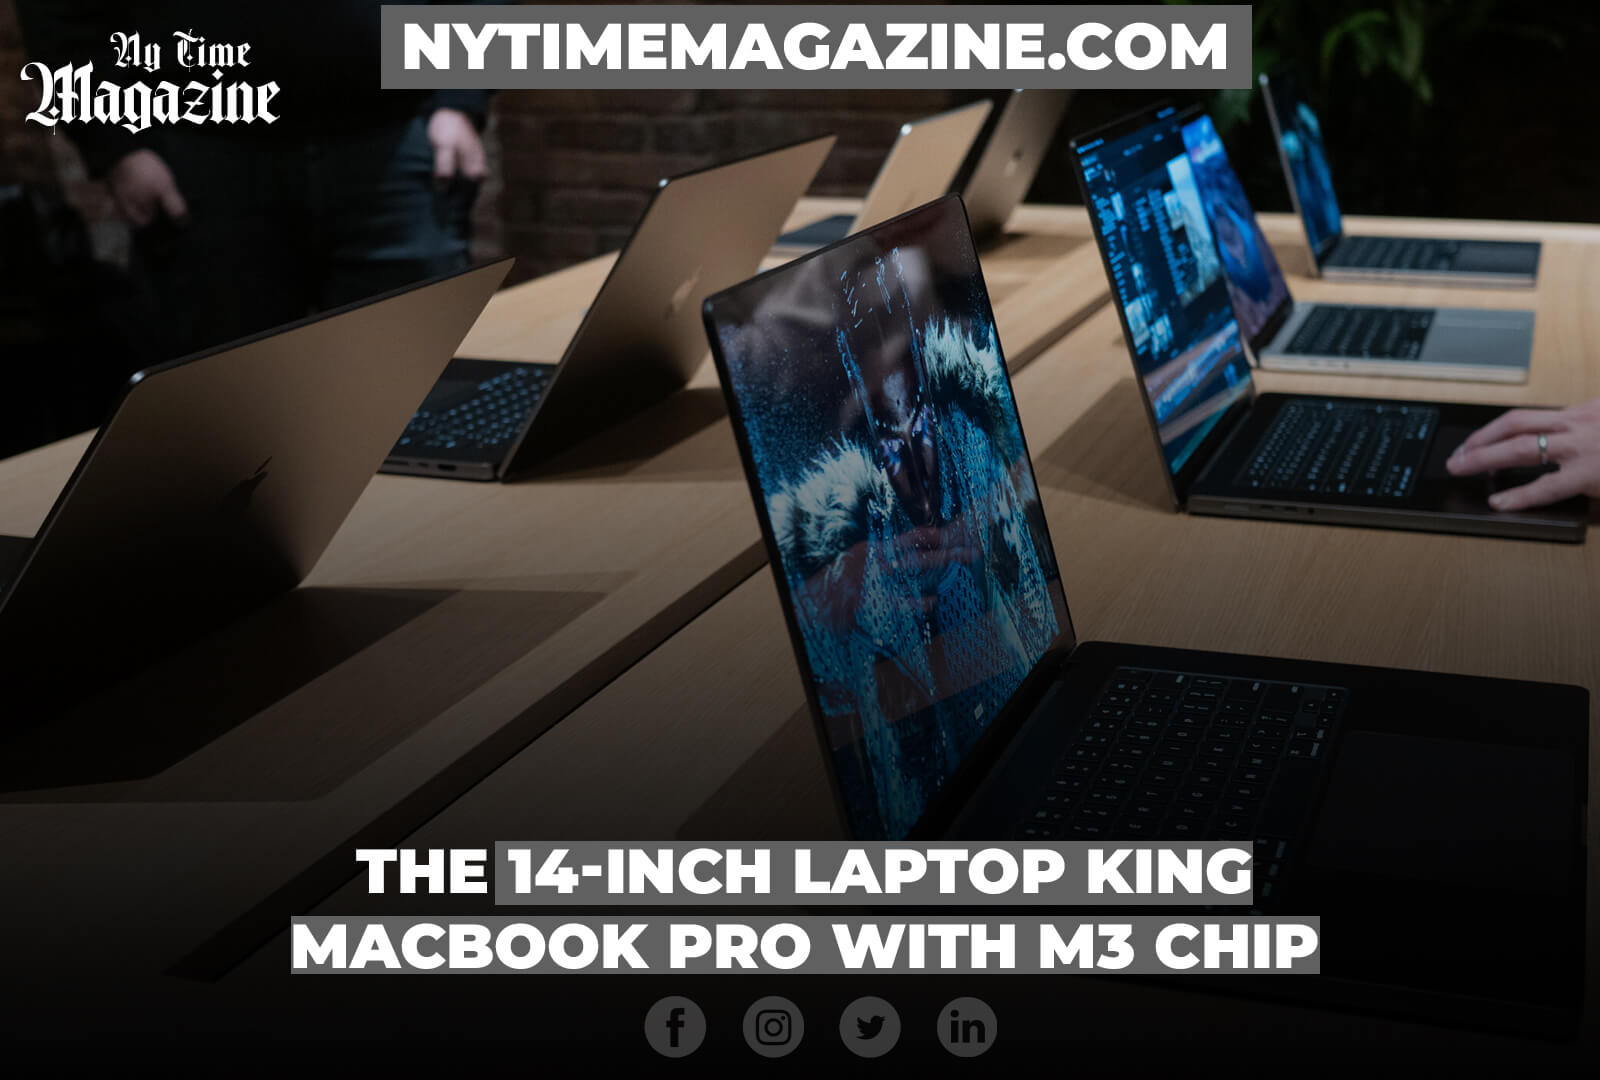 The 14-inch Laptop King! MacBook Pro with M3 Chip